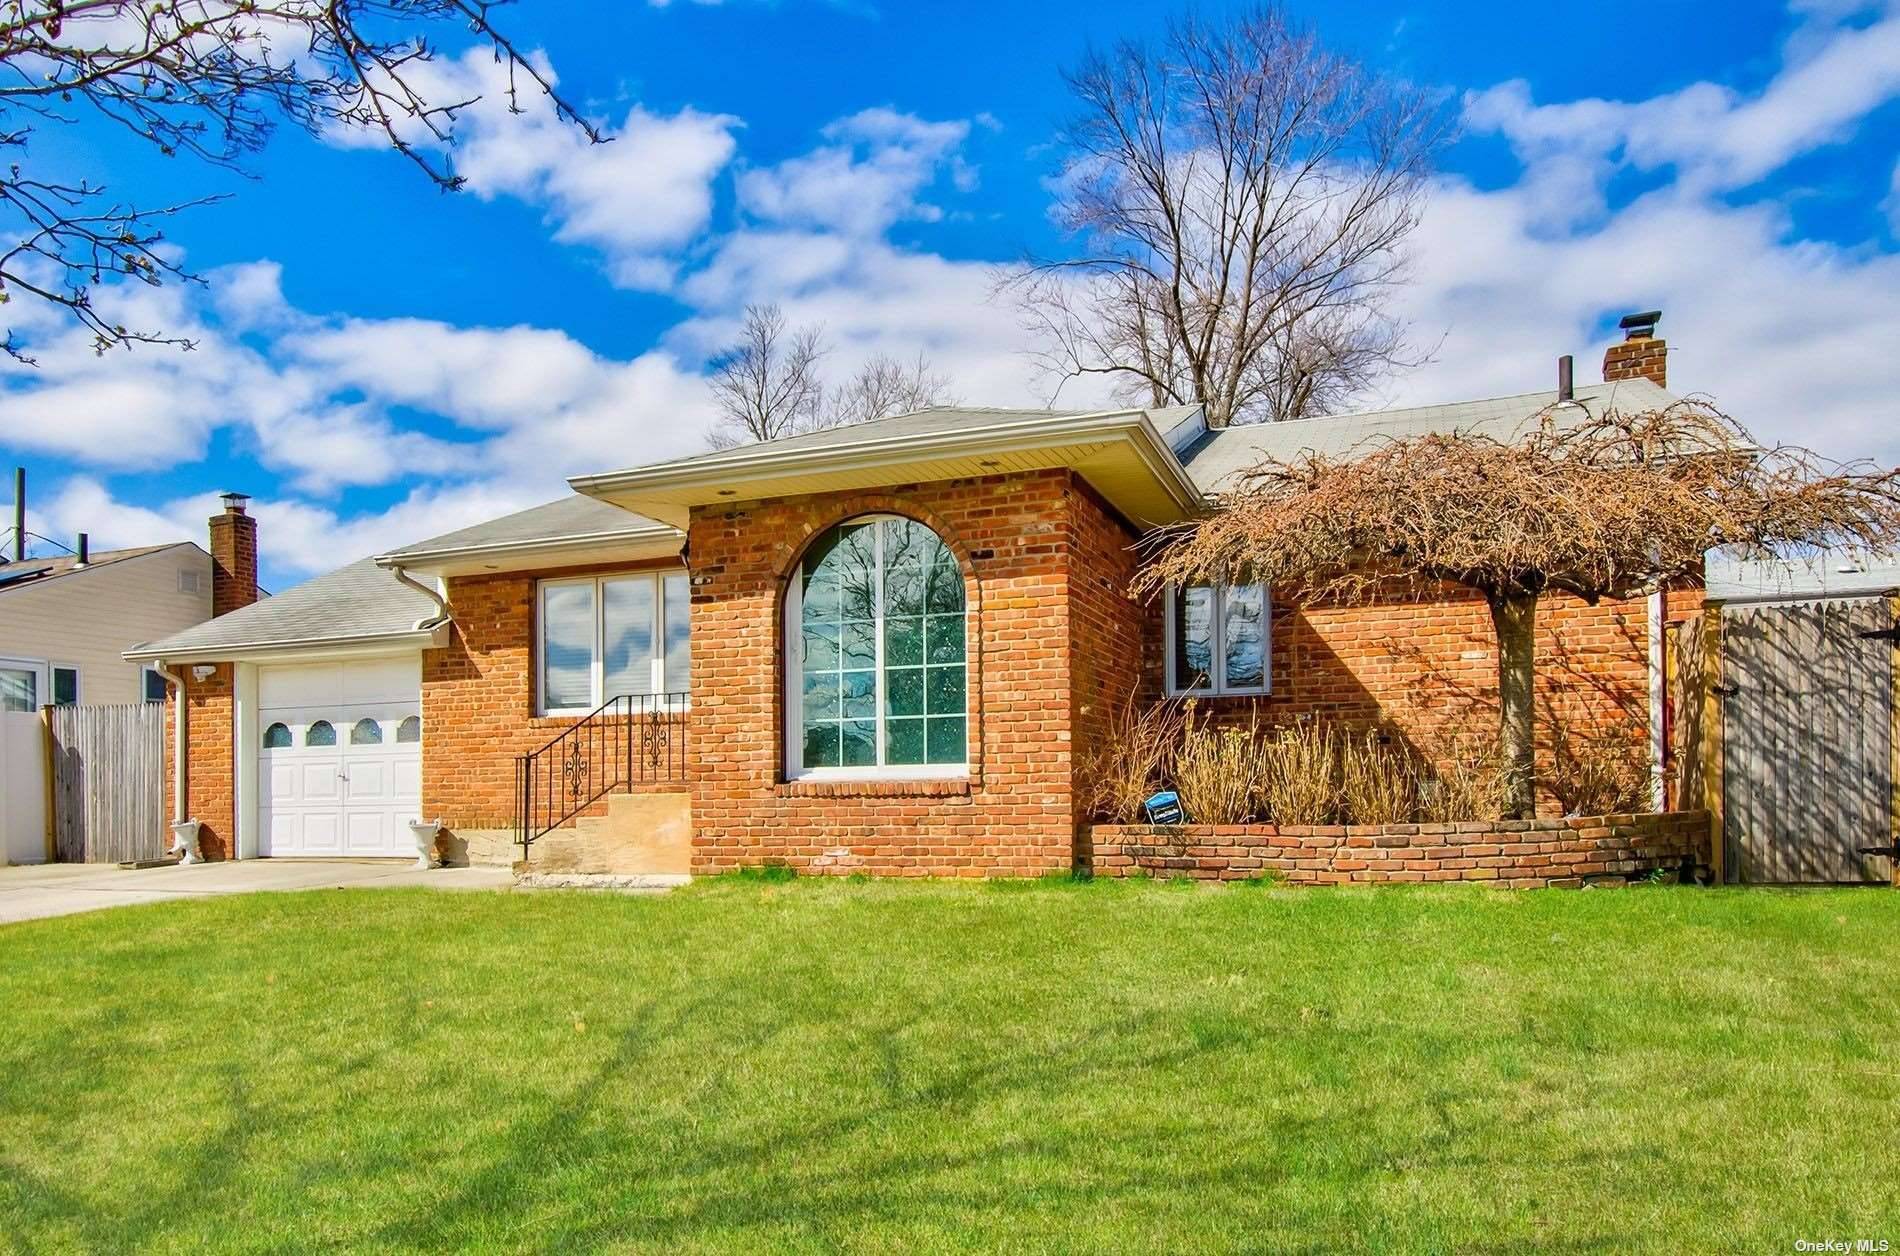 Alluring Ranch Home featuring 3 Bedrooms, 2 Bath in Hicksville, oversized lot, Updated Kitchen, Updated Bathrooms, All brick house, Updated Windows, Pella Siding door, 1 Car garage, Low taxes, New ...